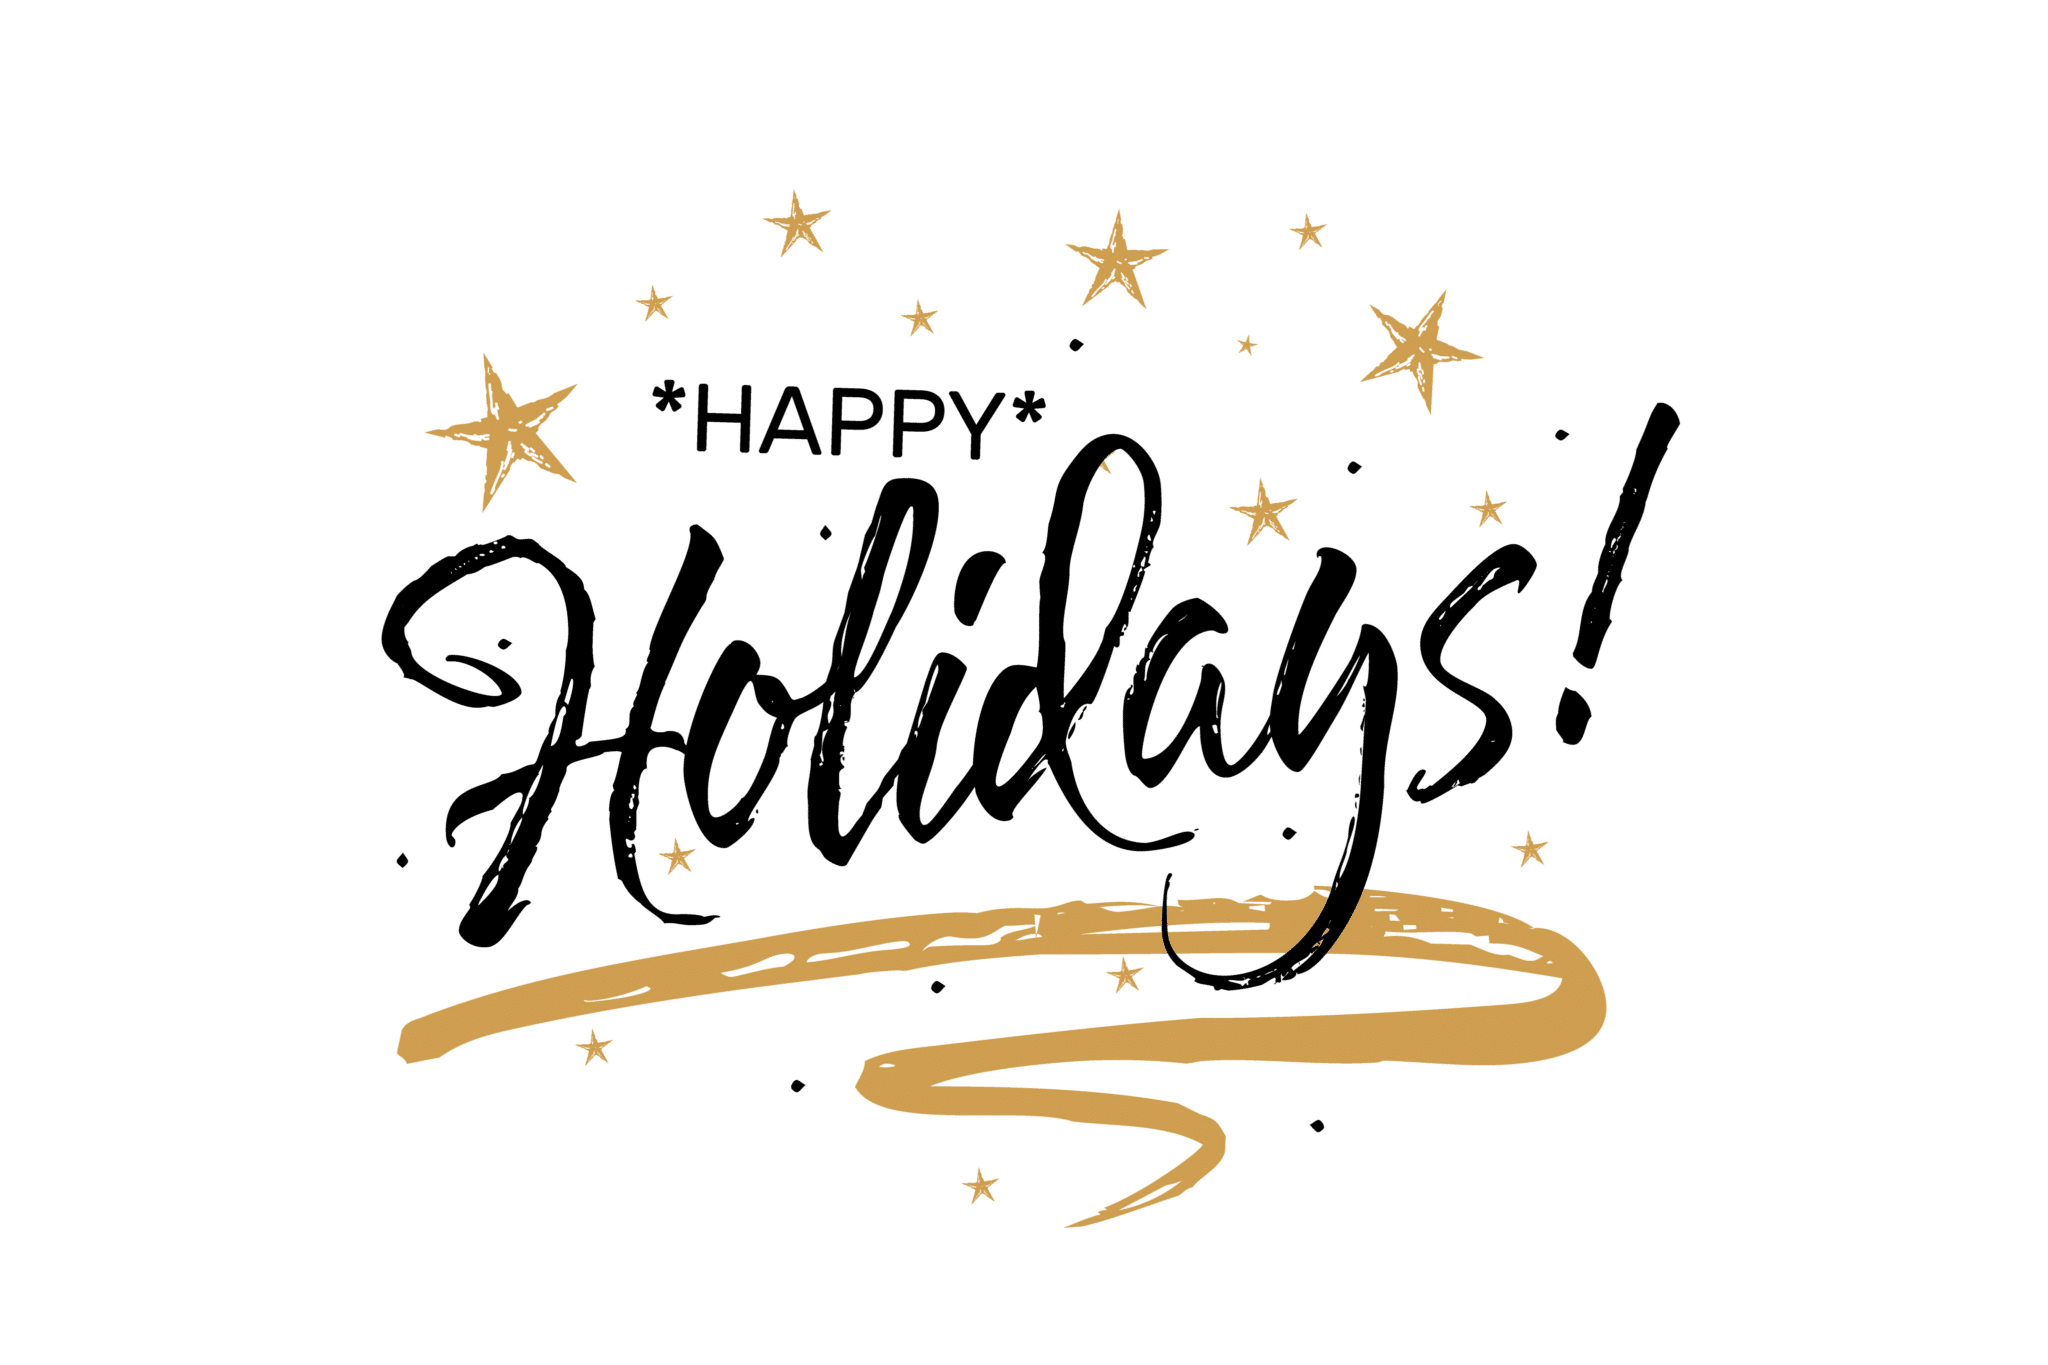 Happy Holidays from The Miner Agency team!